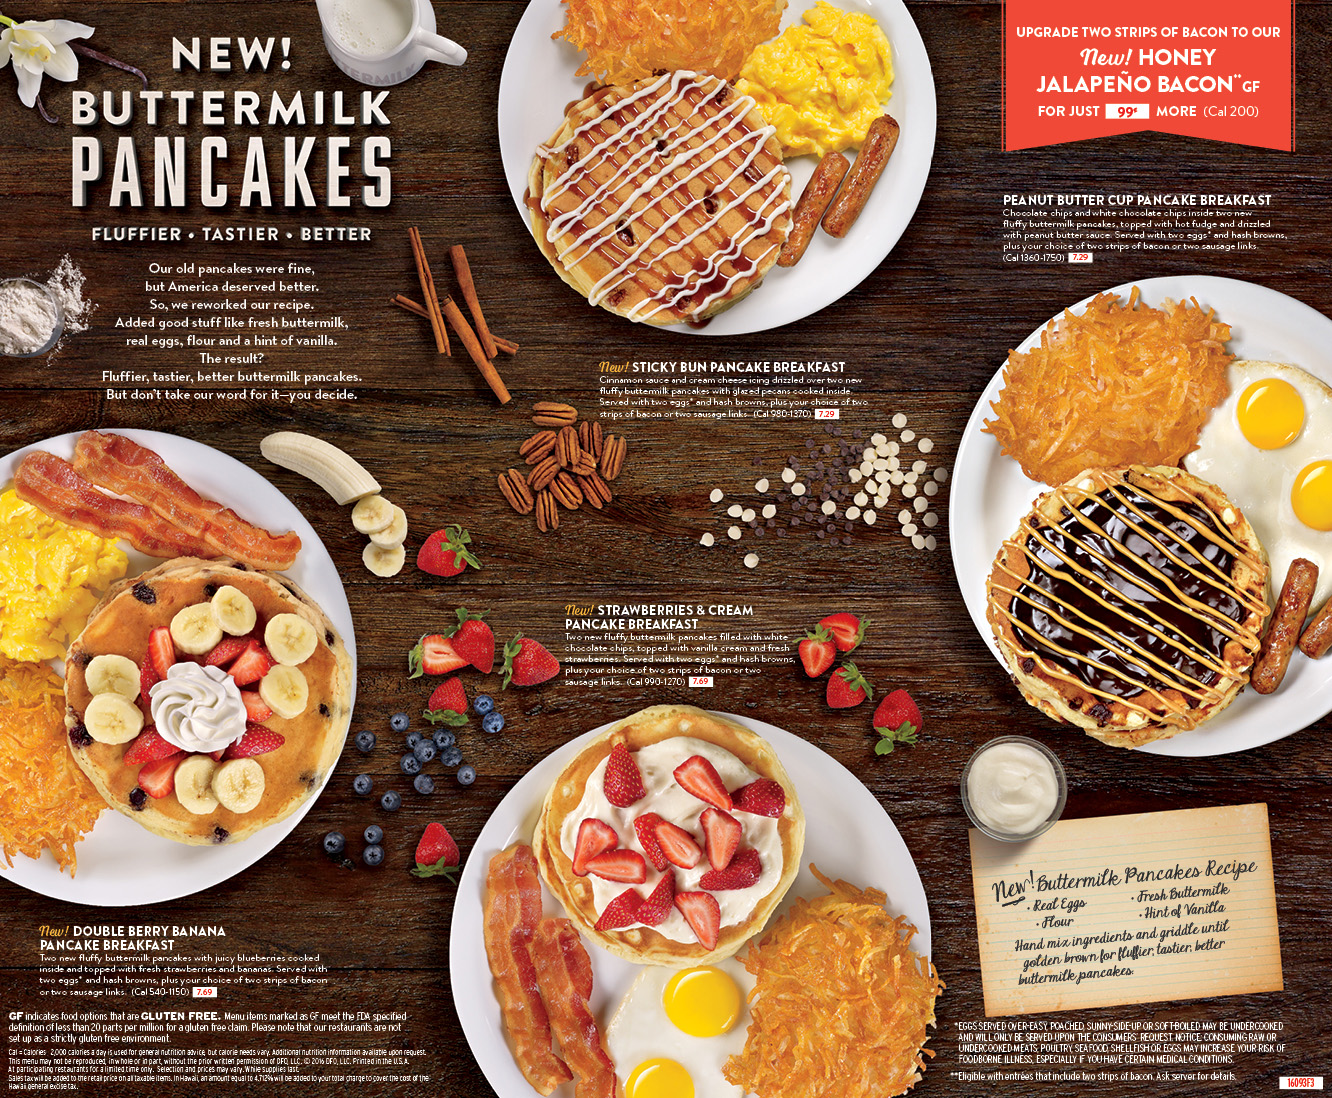 Denny’s Delicious New Stacks Have Been Transformed with Pure Ingredients and Classic Flavors for a Bigger, Better and Tastier Pancake